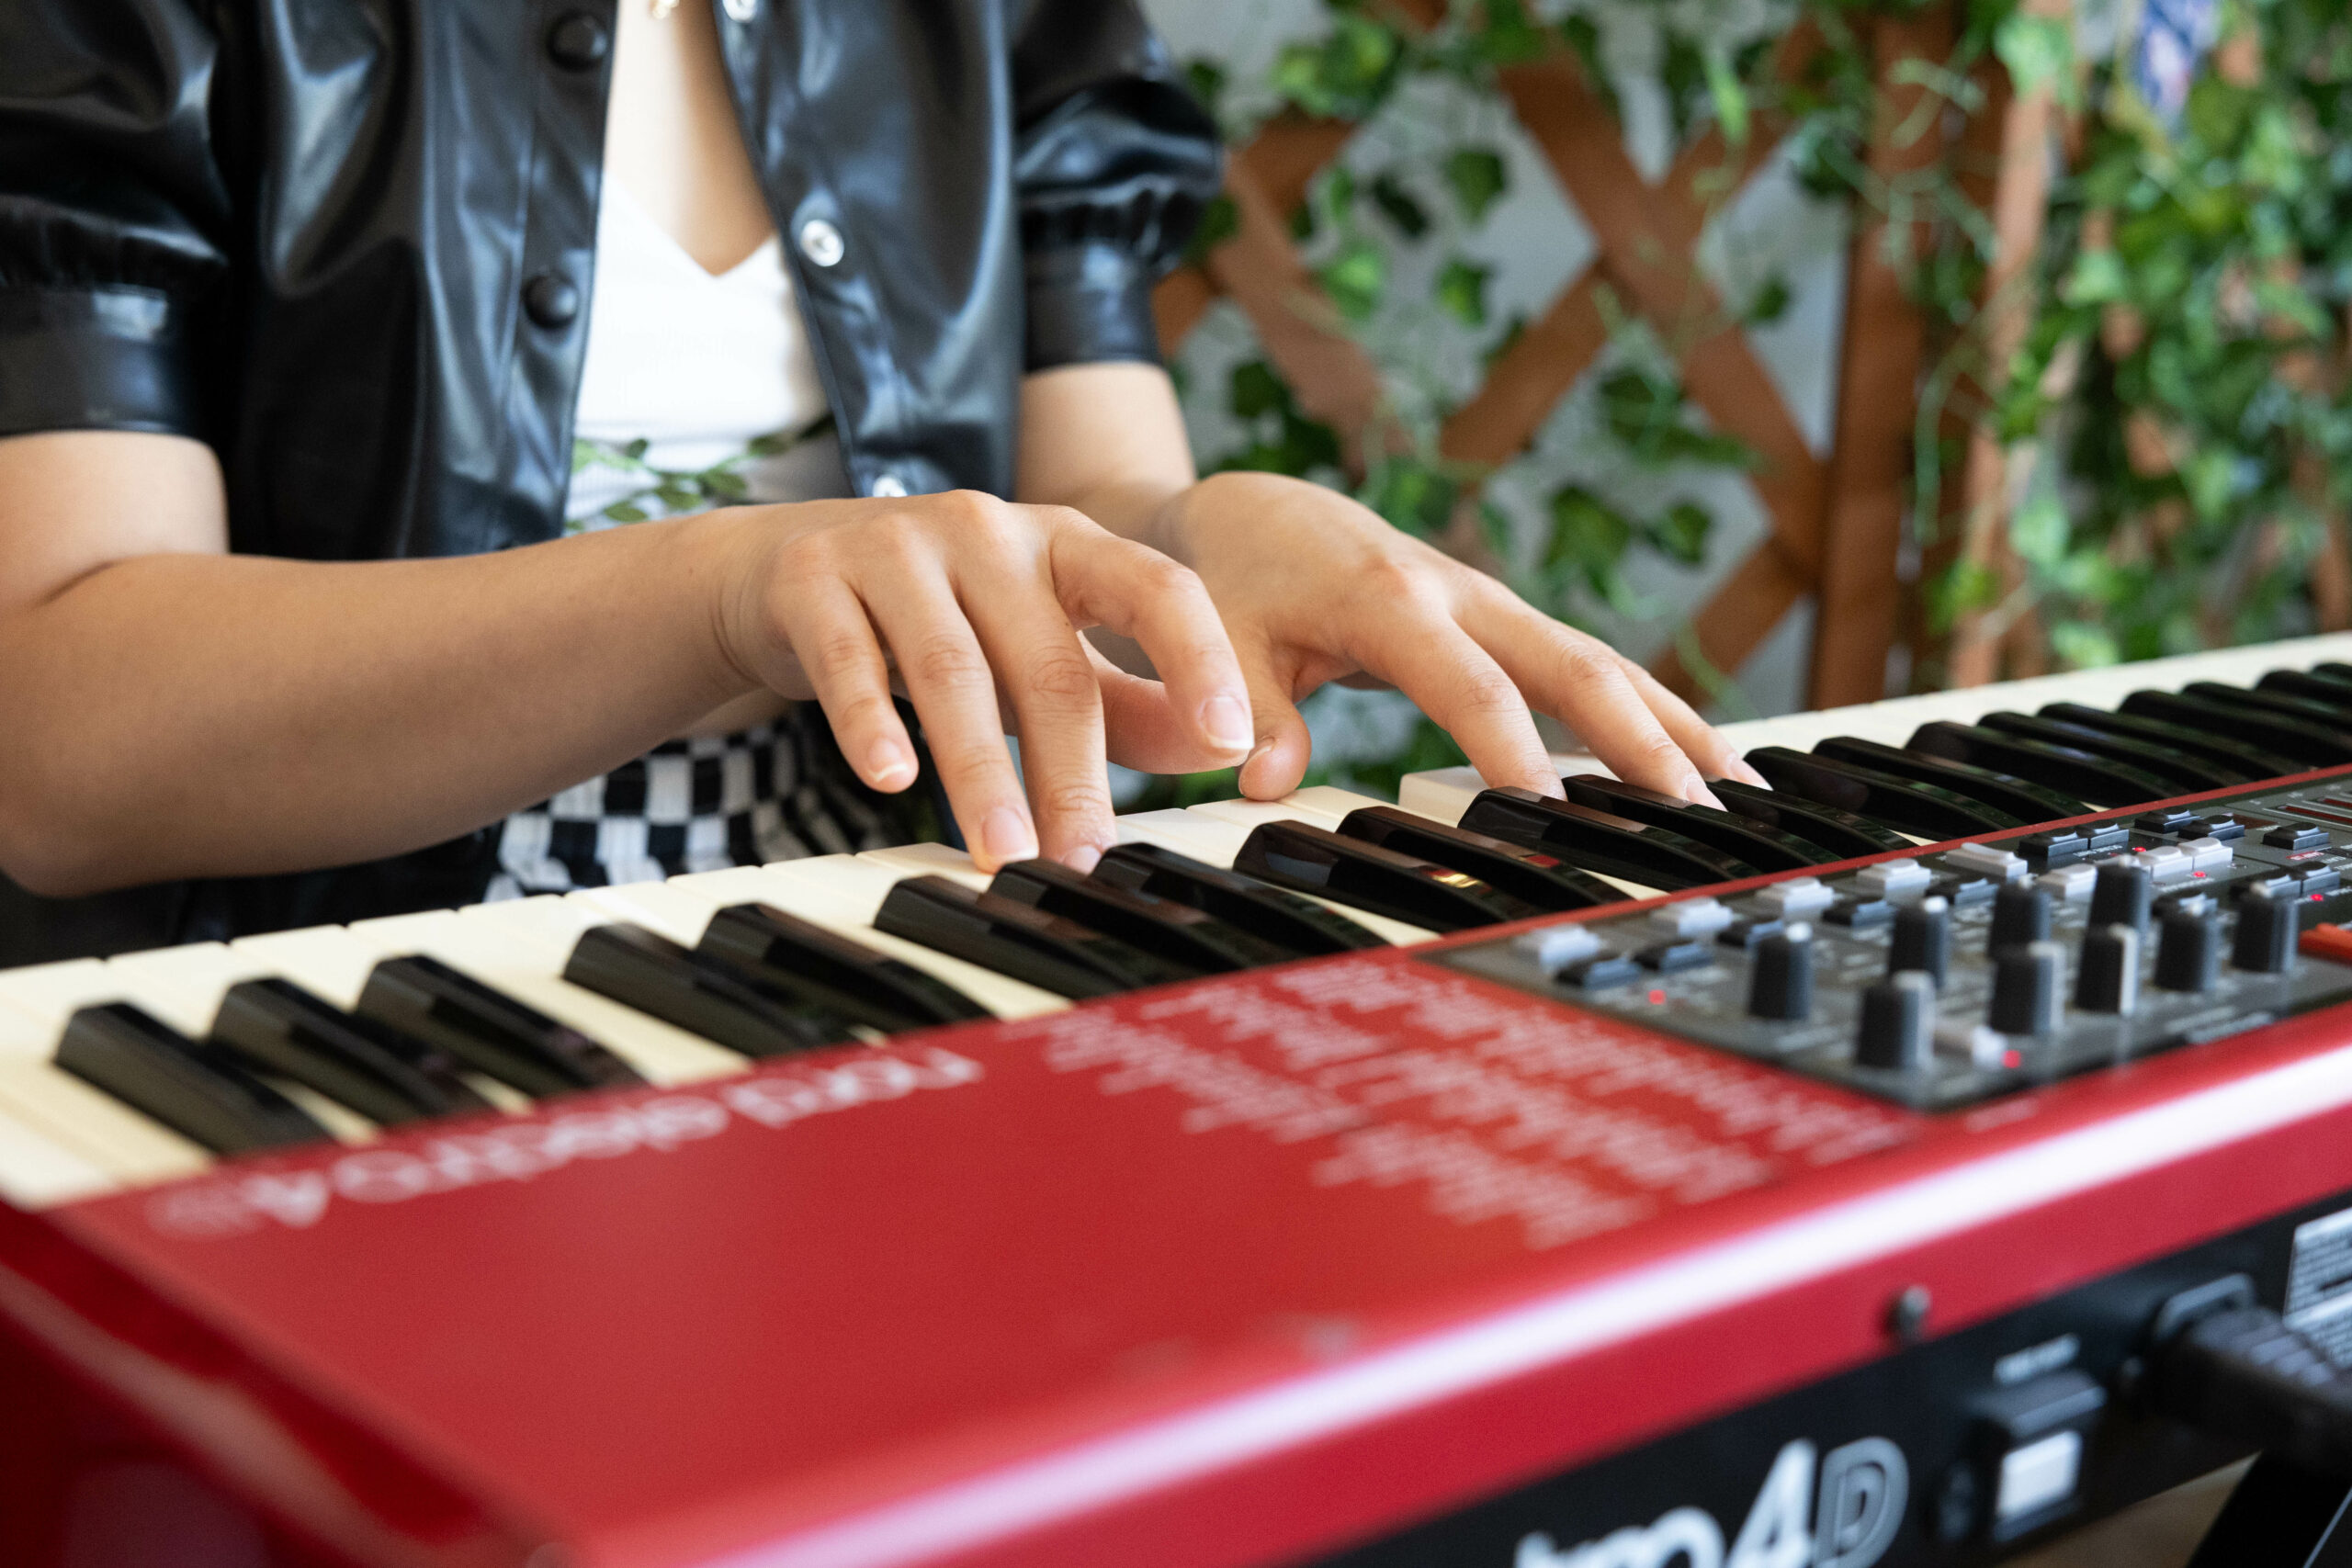 A close-up shot of Promqueen’s hands while playing a red piano keyboard.